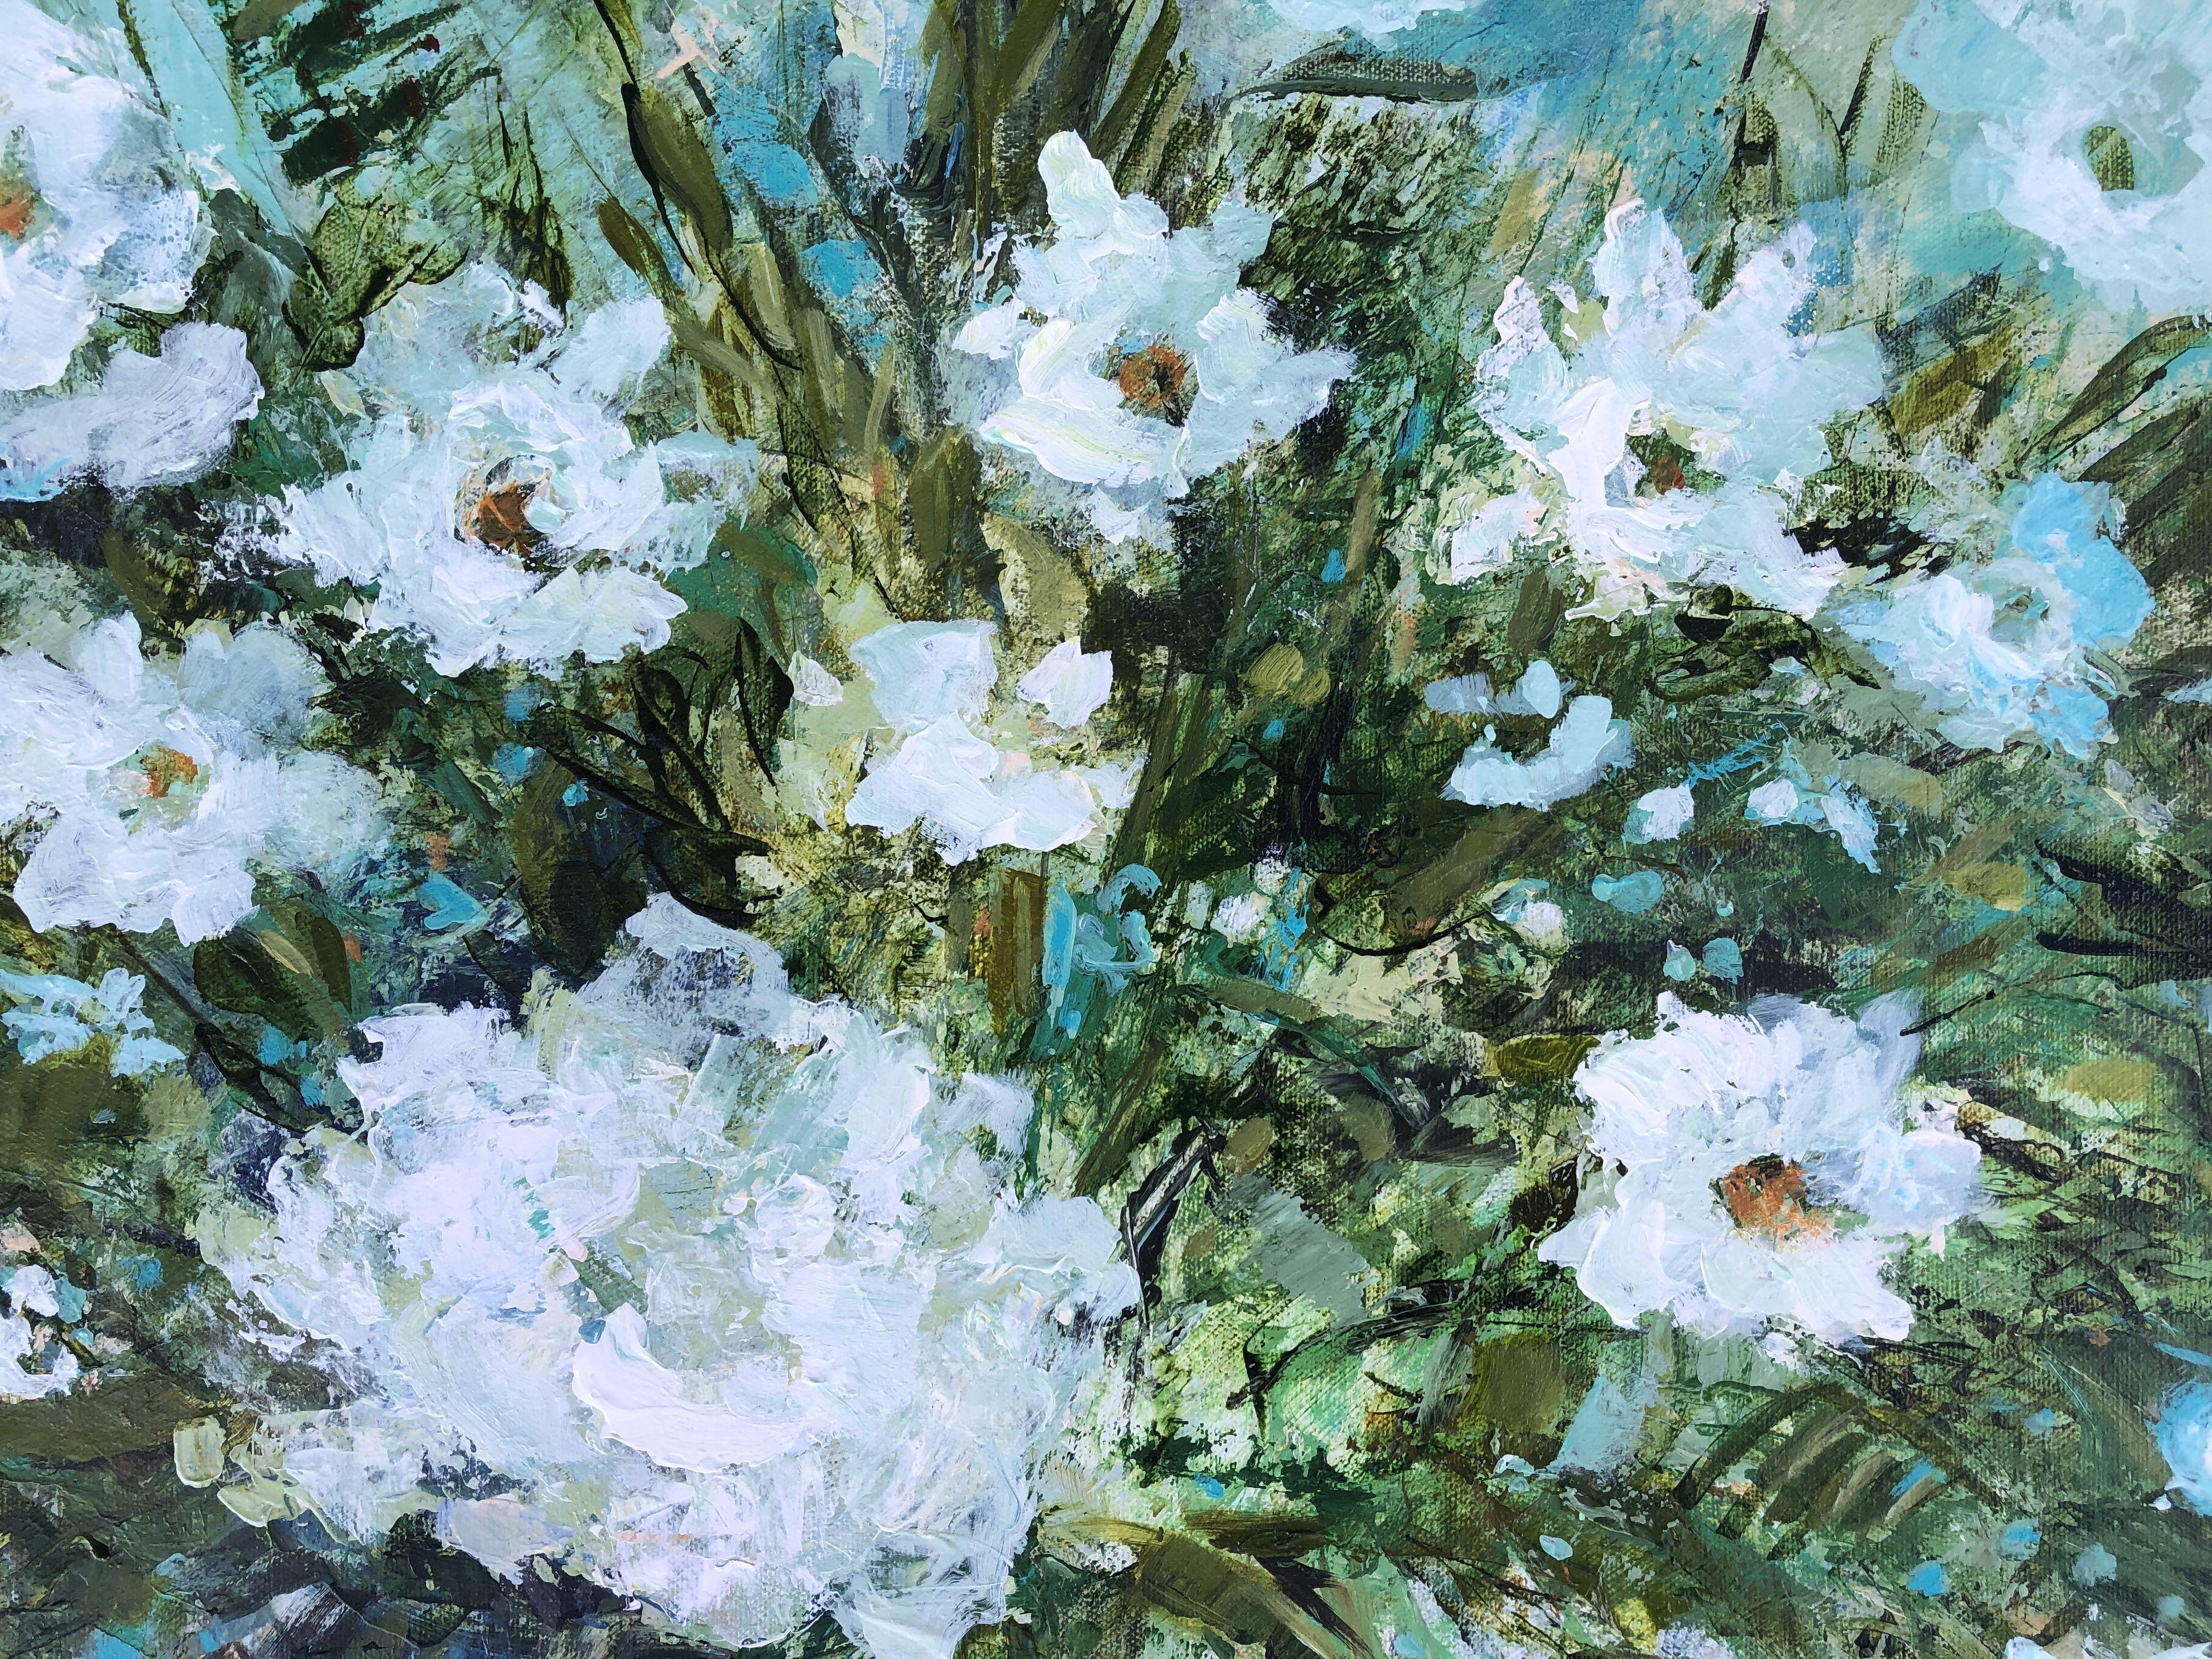 This original, abstract impressionist floral painting is stretched on a 1.5